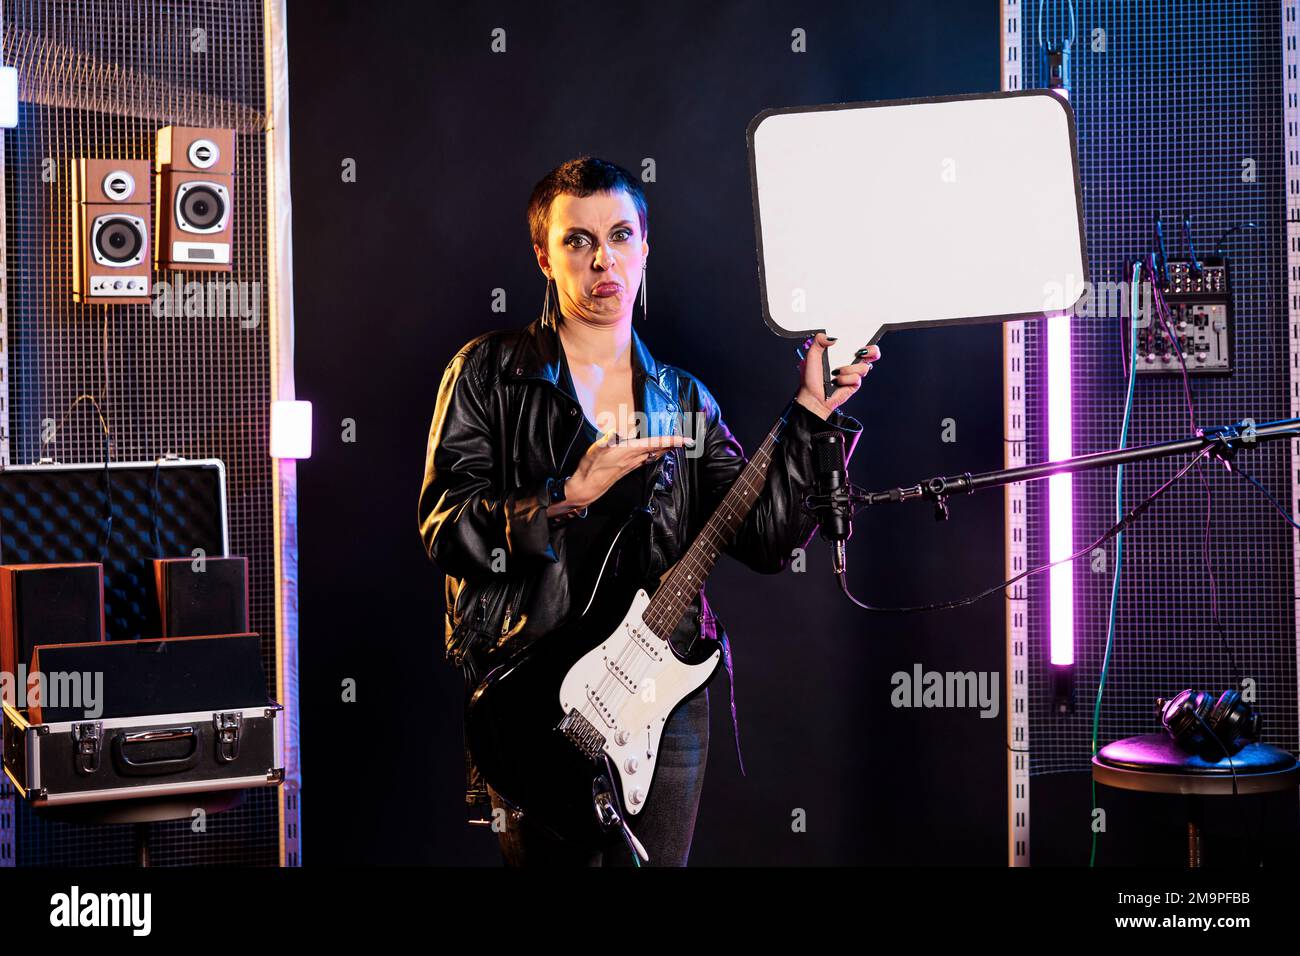 Rocker artist pointing at blank advertising board while playing at electric guitar preparing for rock concert. Musician with grunge style performing heavy metal song in studio, checking instrument sound Stock Photo